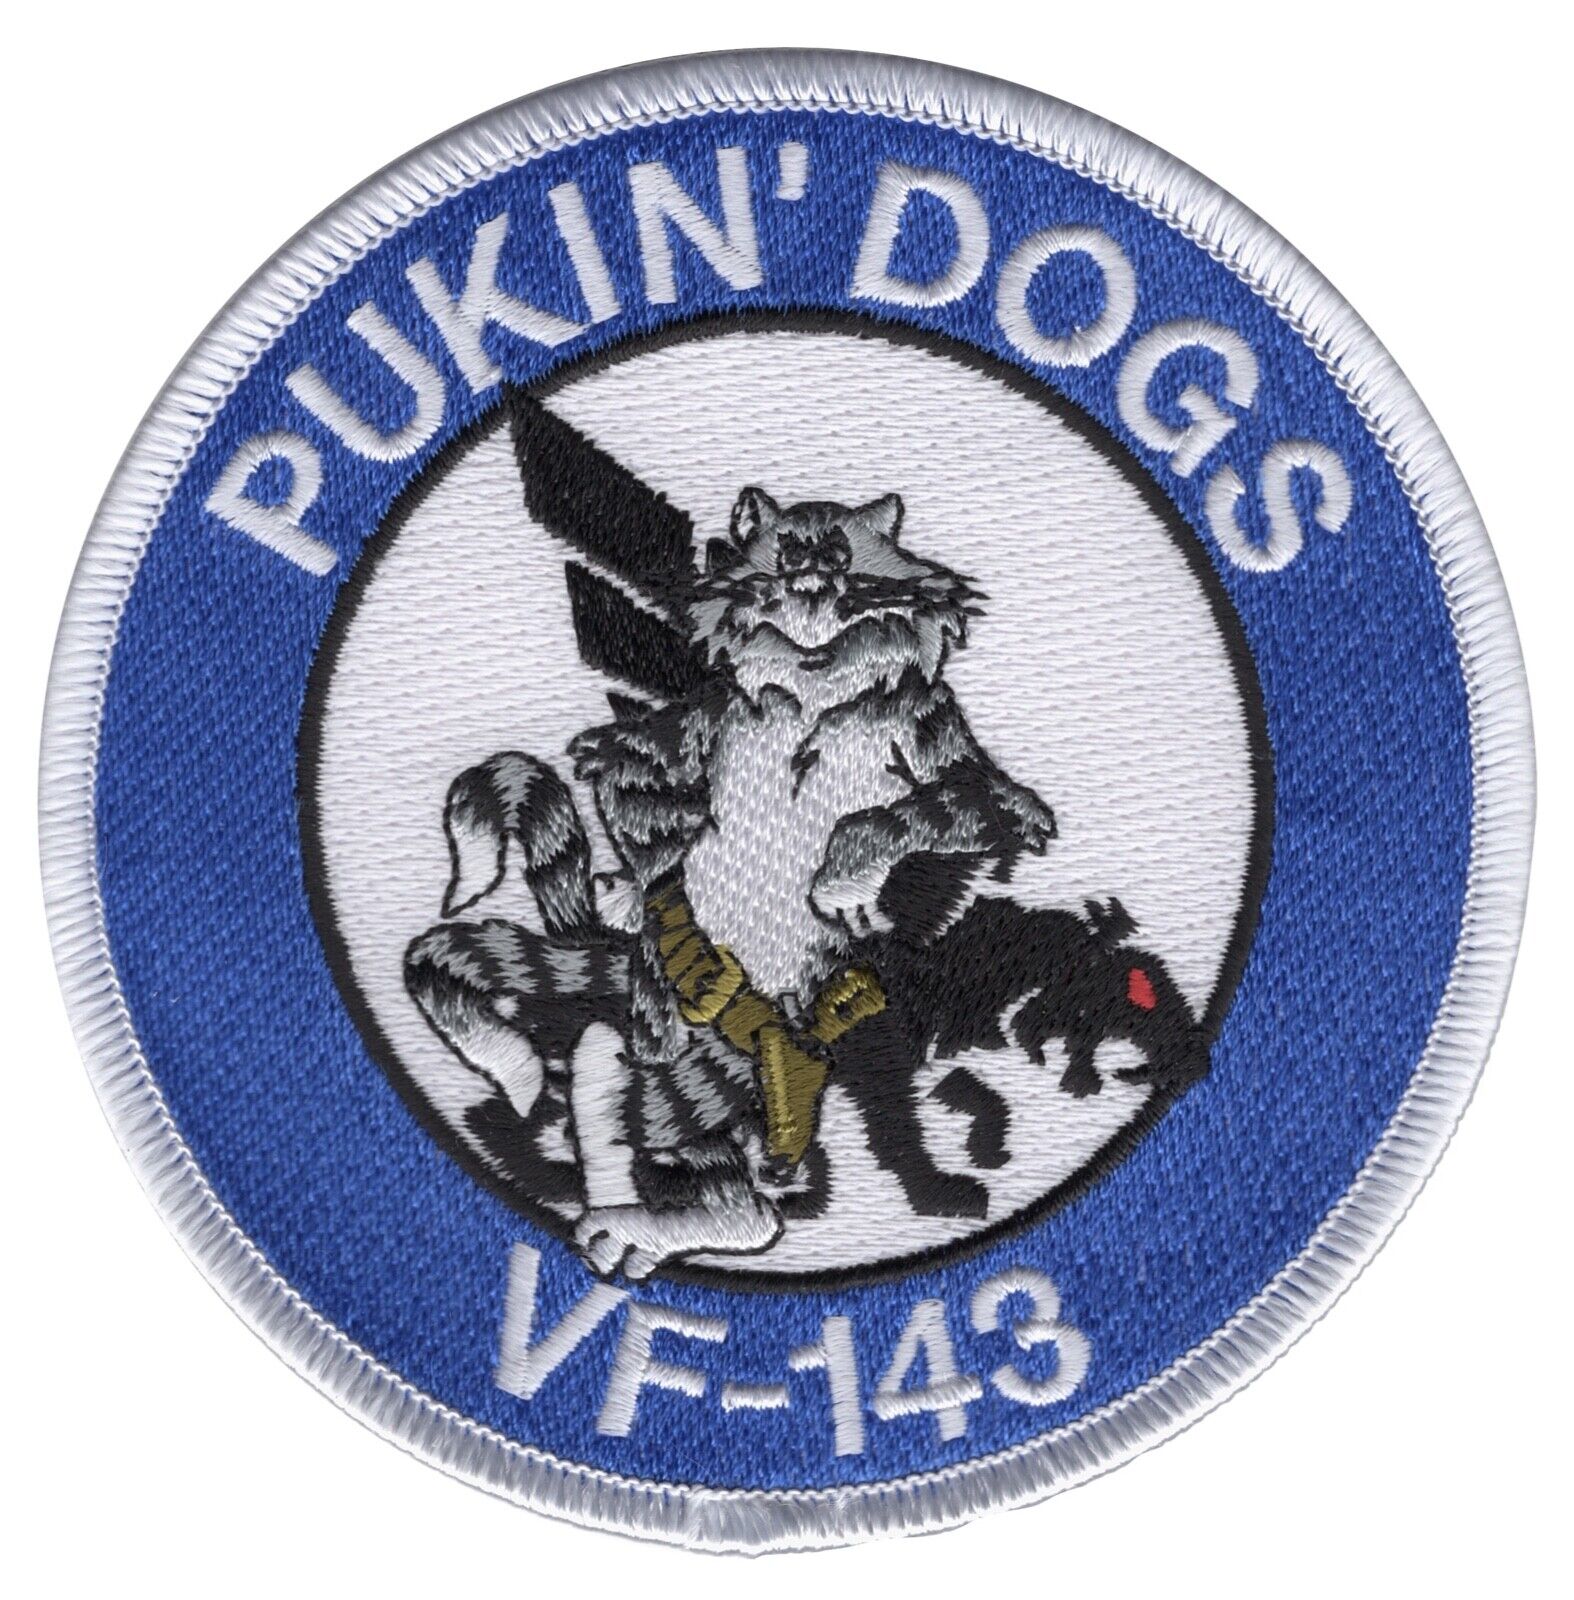 VF-143 Fighter Squadron Patch